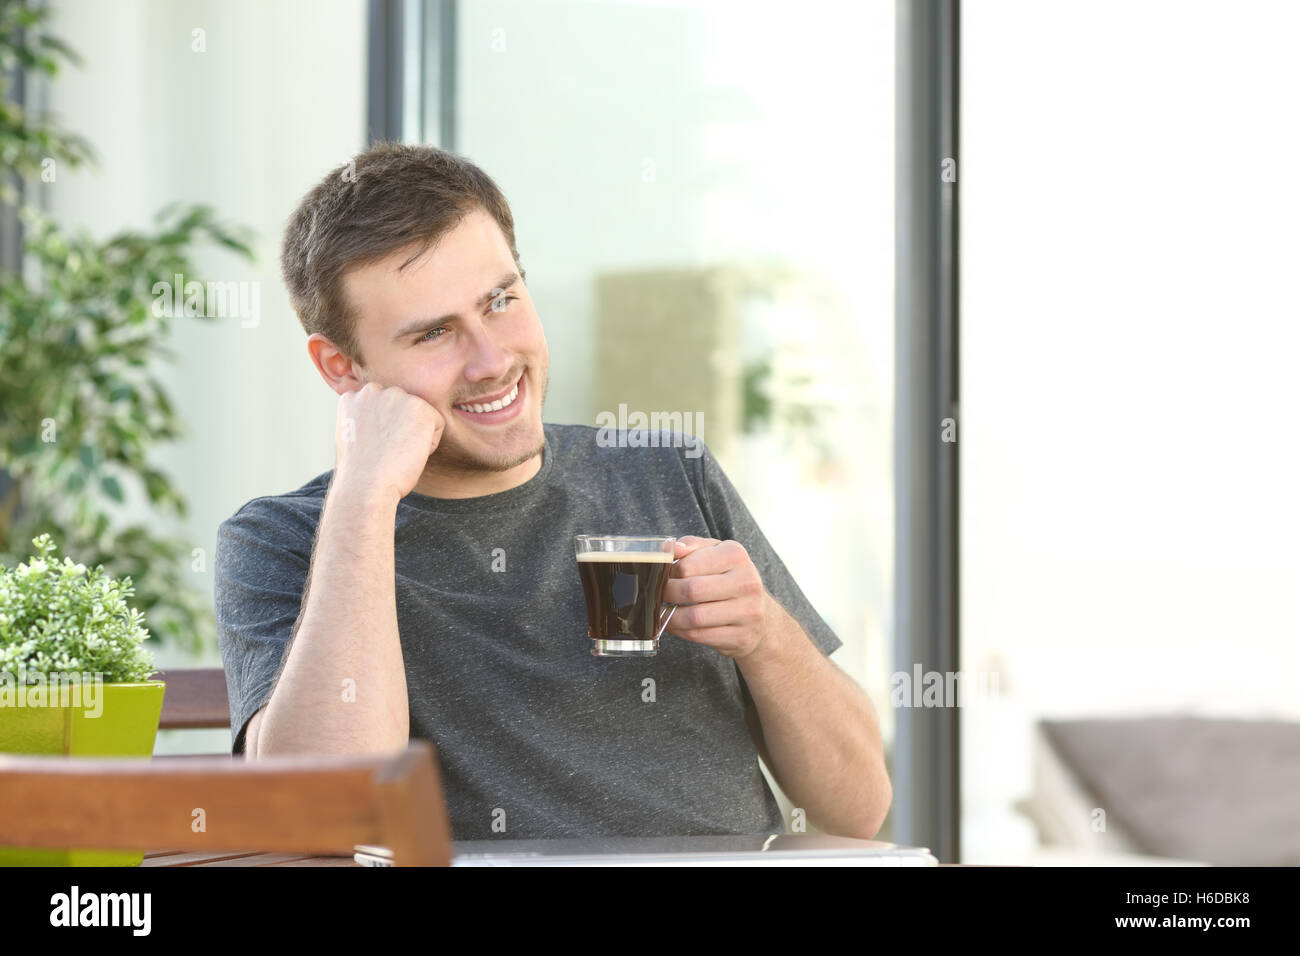 Handsome man relaxing drinking coffee sitting in a table in a balcony of an hotel room or home Stock Photo